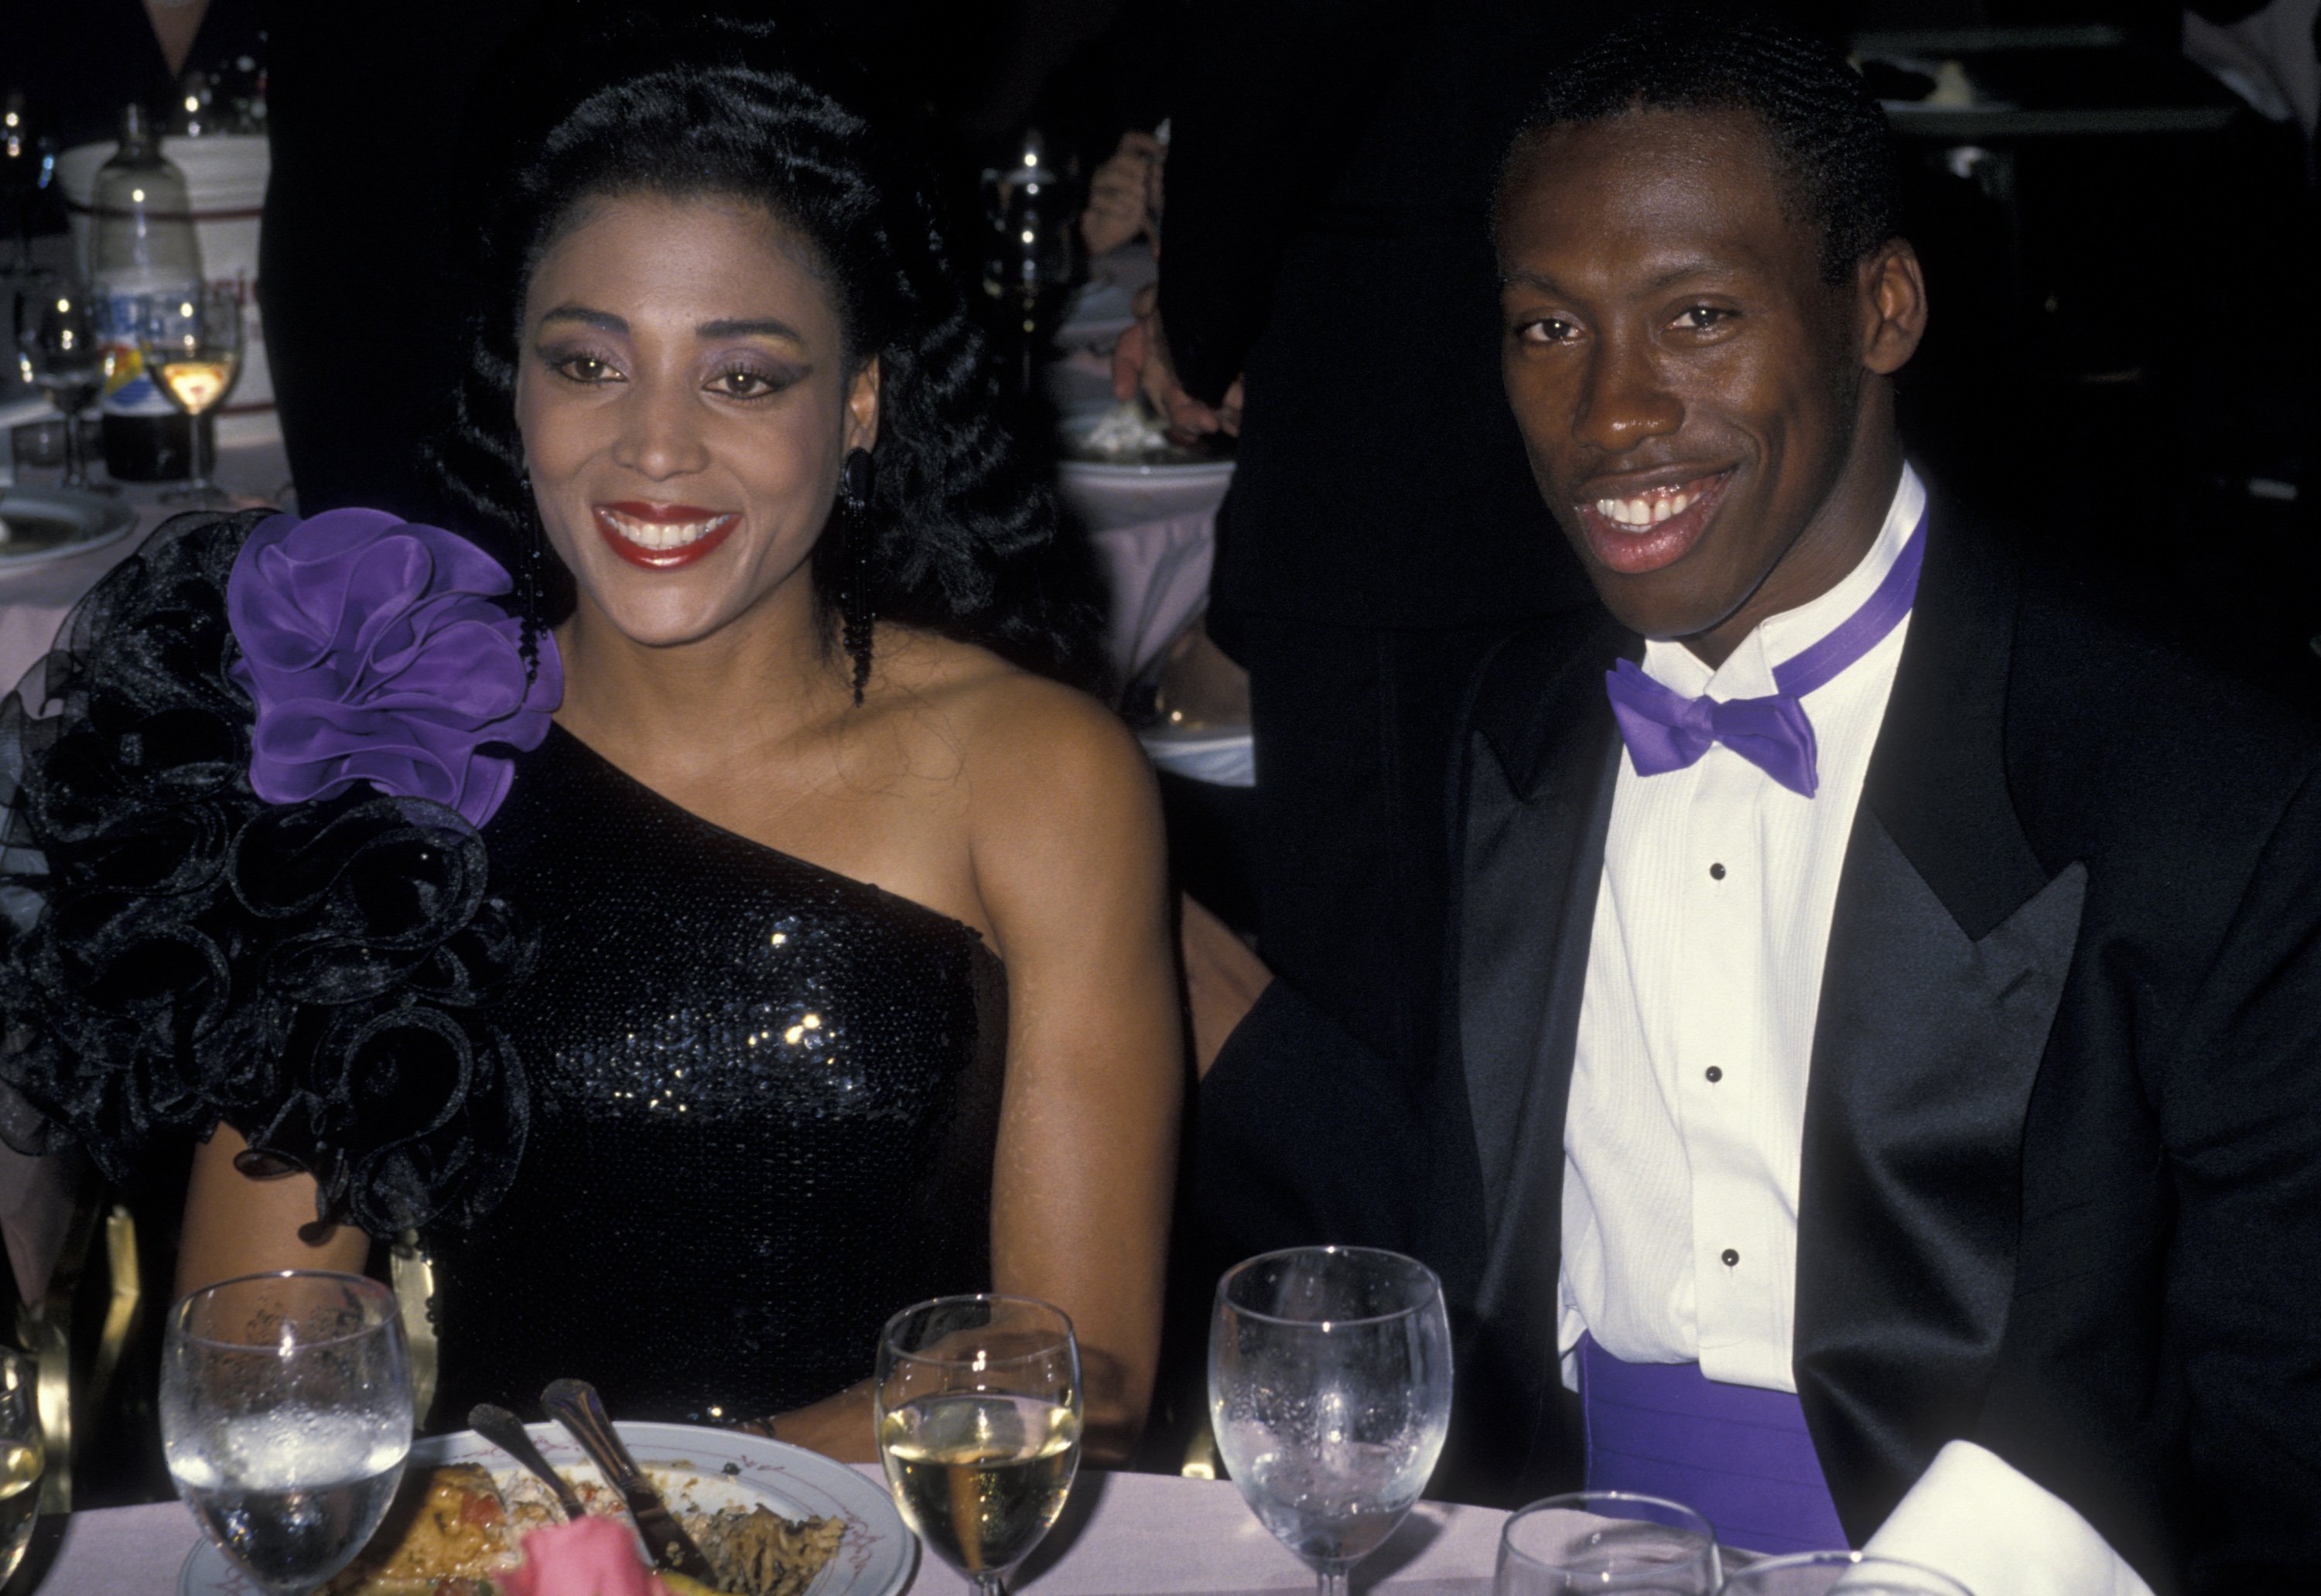 Florence Griffith-Joyner and Al Joyner at the 9th Annual Woman's Sports Foundation Awards on October 17, 1988 in New York City | Photo: Getty Images